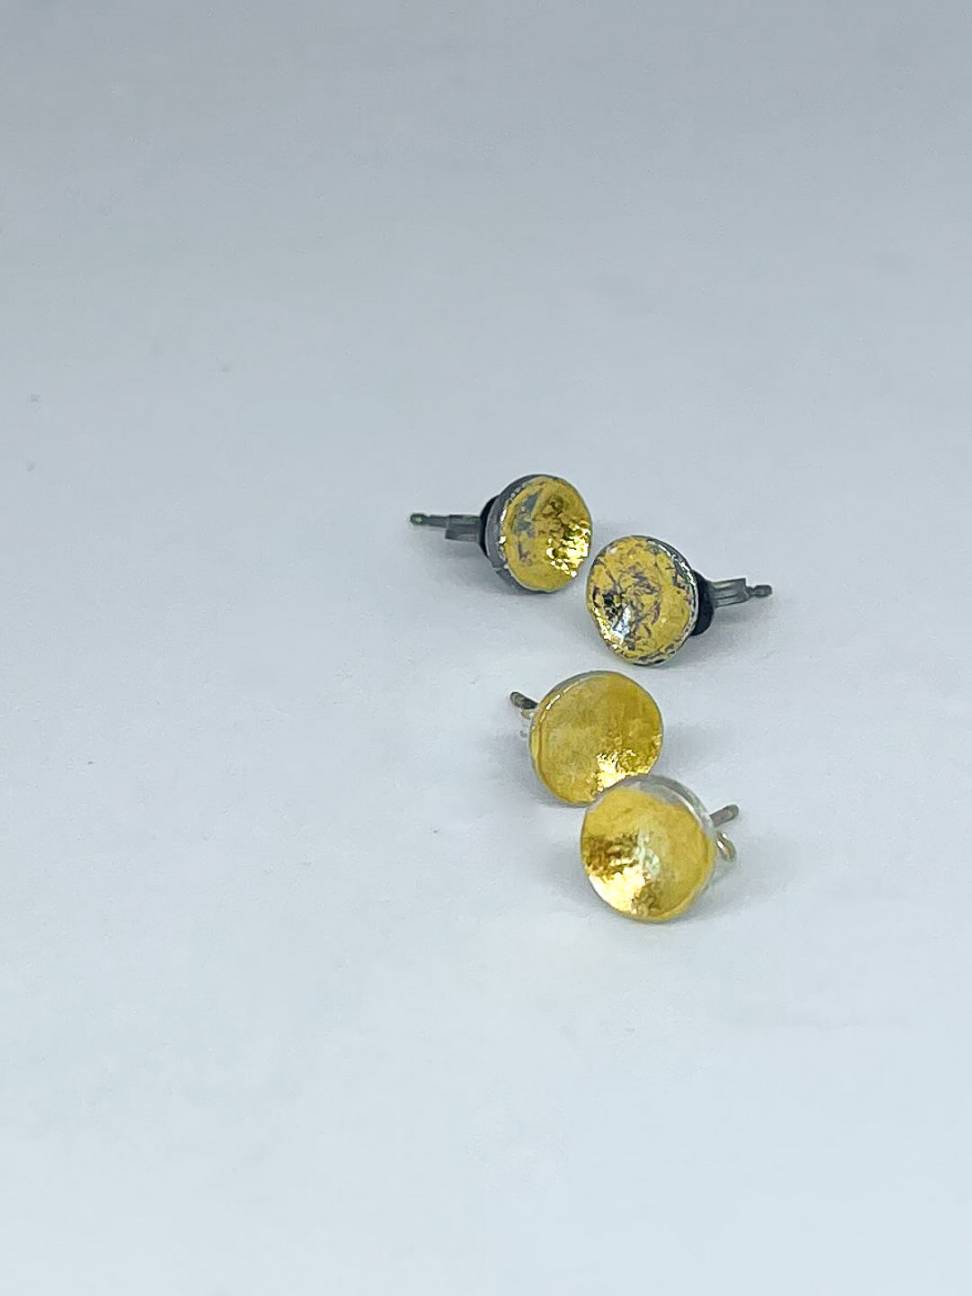 Two pairs of organic Fine Silver concave Stud Earrings displaying the two finishes Oxidised Silver+Gold or Silver+Gold Finish